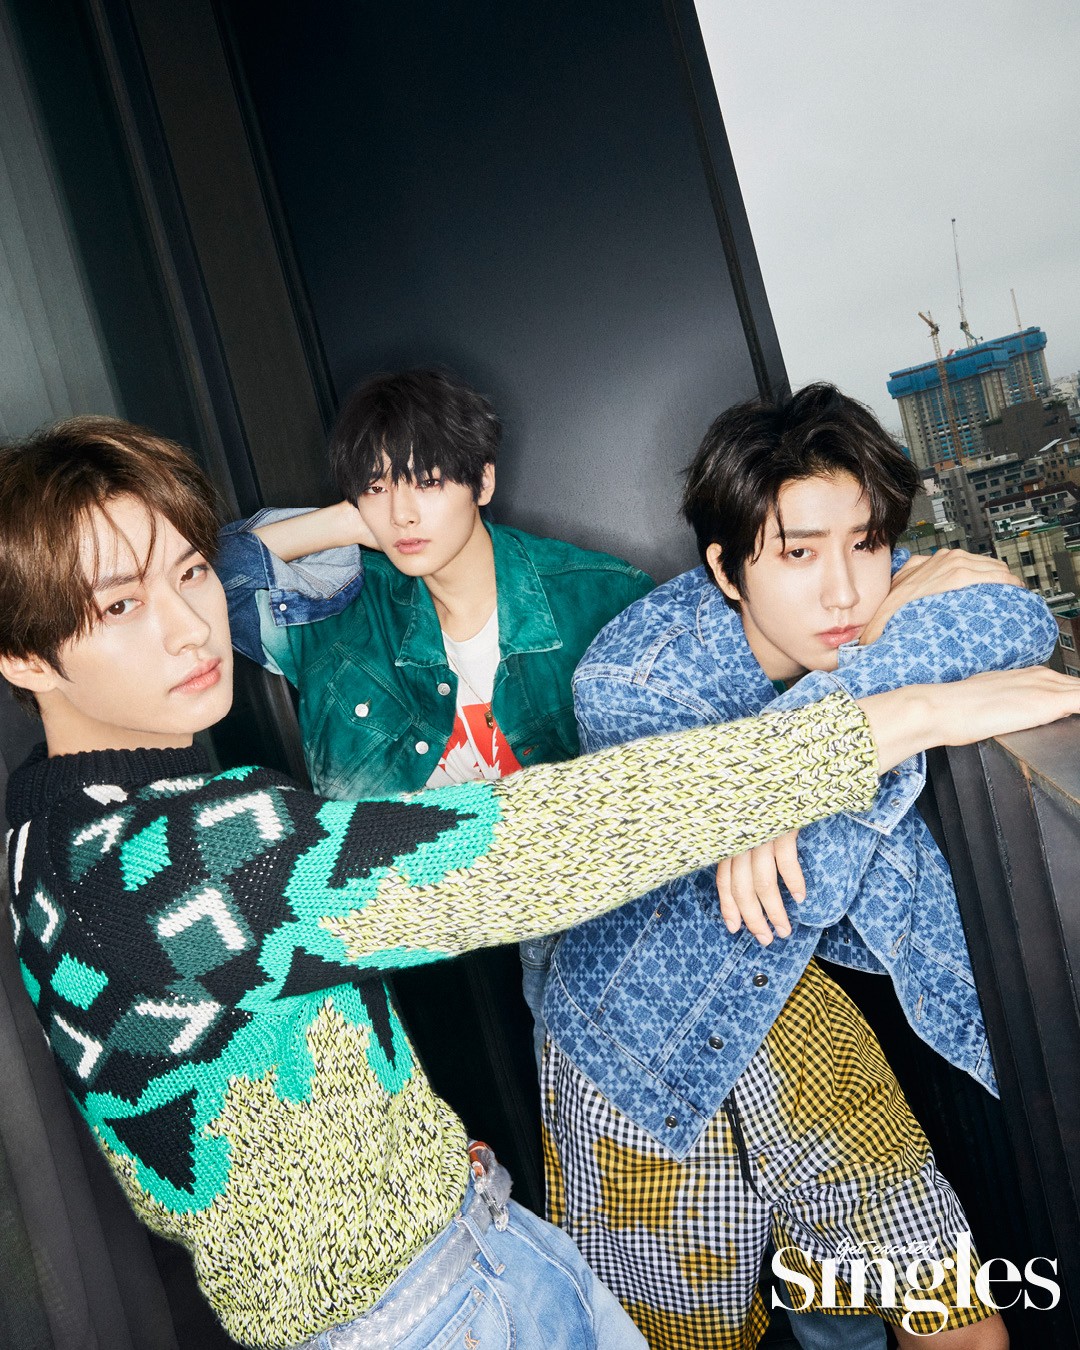 Fashion magazine Singles has released a visual picture of Stray Kids.Stray Kids is the back door of this picture, which shows the image of a clear and pure boy from the charisma of a hot and strong man to the picture that captures the womans heart.Stray Kids, who is starting a comeback with IN Life three months after his first full-length album GO Life in June 2020, consists of three teams of producing team Bang Chan, Changbin, Han, and Seungmin, Aien, and Rino, Hyunjin and Felix, called the dance line, who make their own songs and go on stage after intense practice. Its a talented Idol group.Bang Chan, a member of the teams production group Three Lacha, said, When I work on Music, I like hip-hop and R & B, but I also work on a lot of calm songs.In particular, I would like to express various expressions through titles or lyrics. There are messages that we want to convey in the lyrics, but it is also important how listeners interpret them.The ambivalent expression has many interesting points. Stray Kids, who said that Musics ultimate goal is to continue to show our genre, said, We want to be a group that is recognized by many people around the world with the music we make and show ourselves.When I first became a trainee, there was a time when everything was unfamiliar and unadapted.I felt like a stranger, but I was able to adapt and practice hard and become the Stray Kids of the present. Hyunjin said, I watched a lot of images of Taemin and Jimin who I like and respect, and made me an opportunity to catch and stimulate me.Its the goal of achieving a dream, and its full of it now, Changbin said.About 20 unit names that fans have made like nicknames.Among them, Stray Kids, who said that 10 units of Kaguanz (Sung Riz), Honey Mengs, Dangunz, Coin Taste Tteokbokkiz (Dongdukz), Limakz (Last Maks), Meddance, Molize, Bread Honeys, Poms, and Seocrafts were impressive, said, The name is so cute.I am proud that we have various units and we are getting better together. Stray Kidss interview with the pictorials, which are expected to be more colorful as talented musicians due to infinite possibilities, can be found in the September issue of Singles and the mobile issue of Singles (m.thesingle.co.kr).